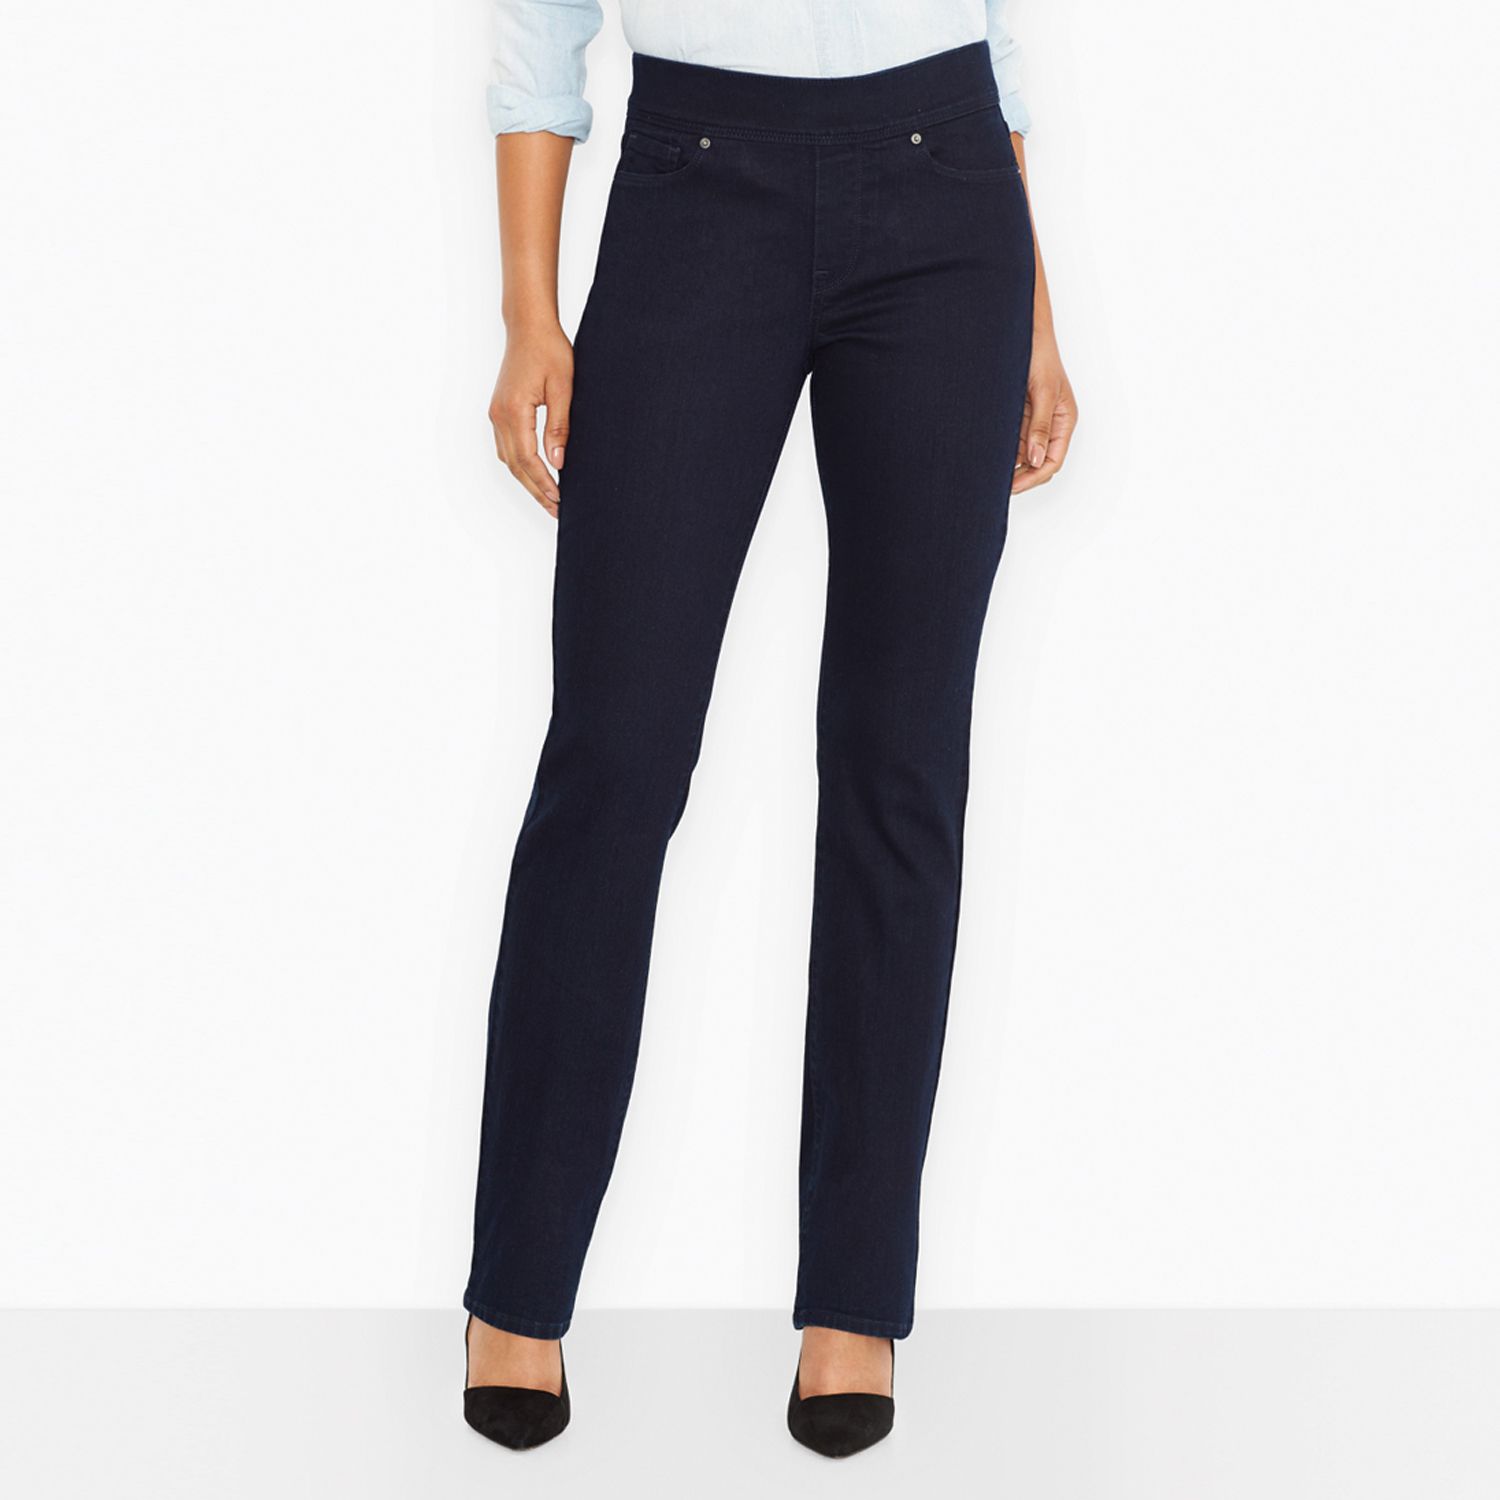 Levi's Perfectly Slimming Pull-On Jeans 